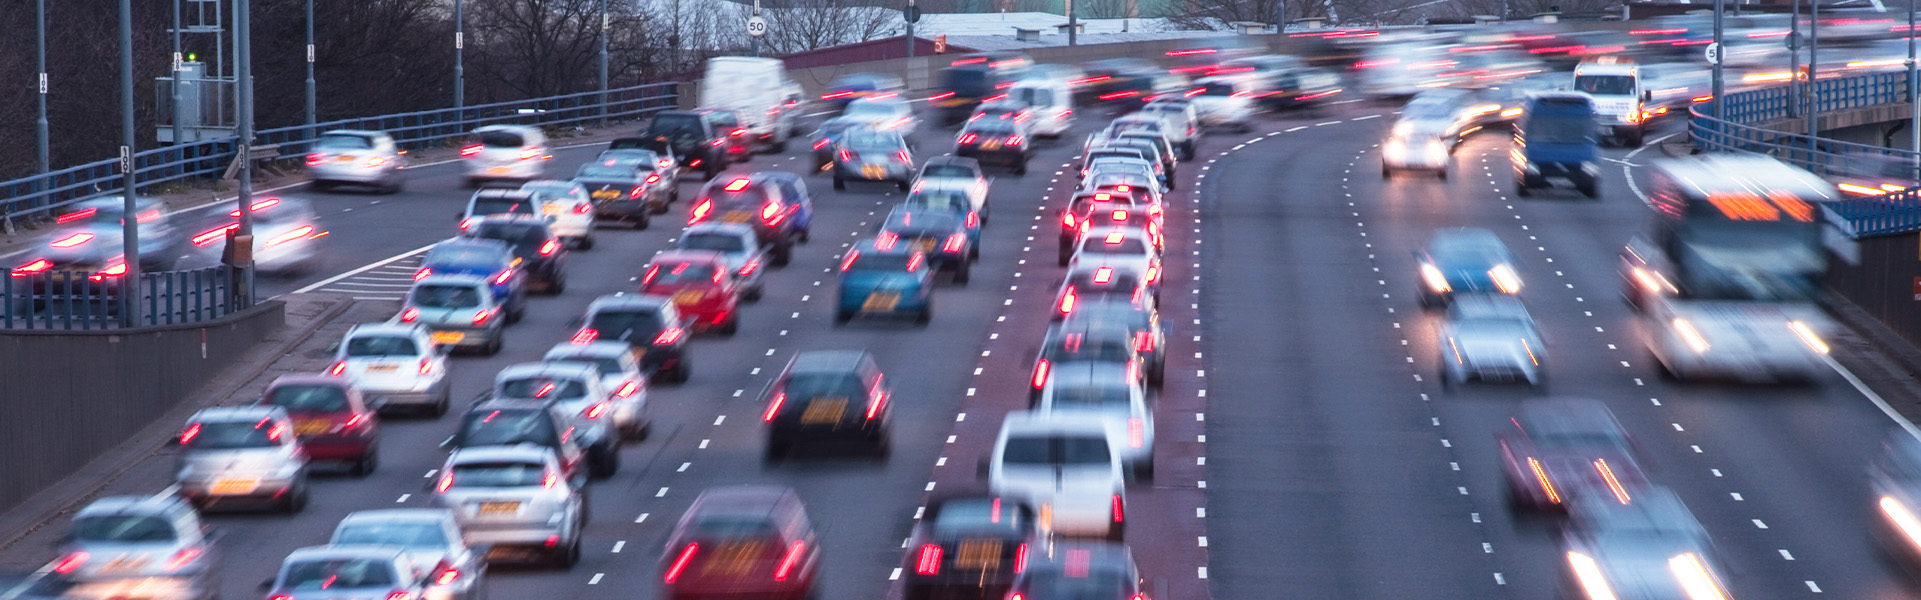 FCA writes to MPs over car insurance premiums. What do increases mean for fraud?